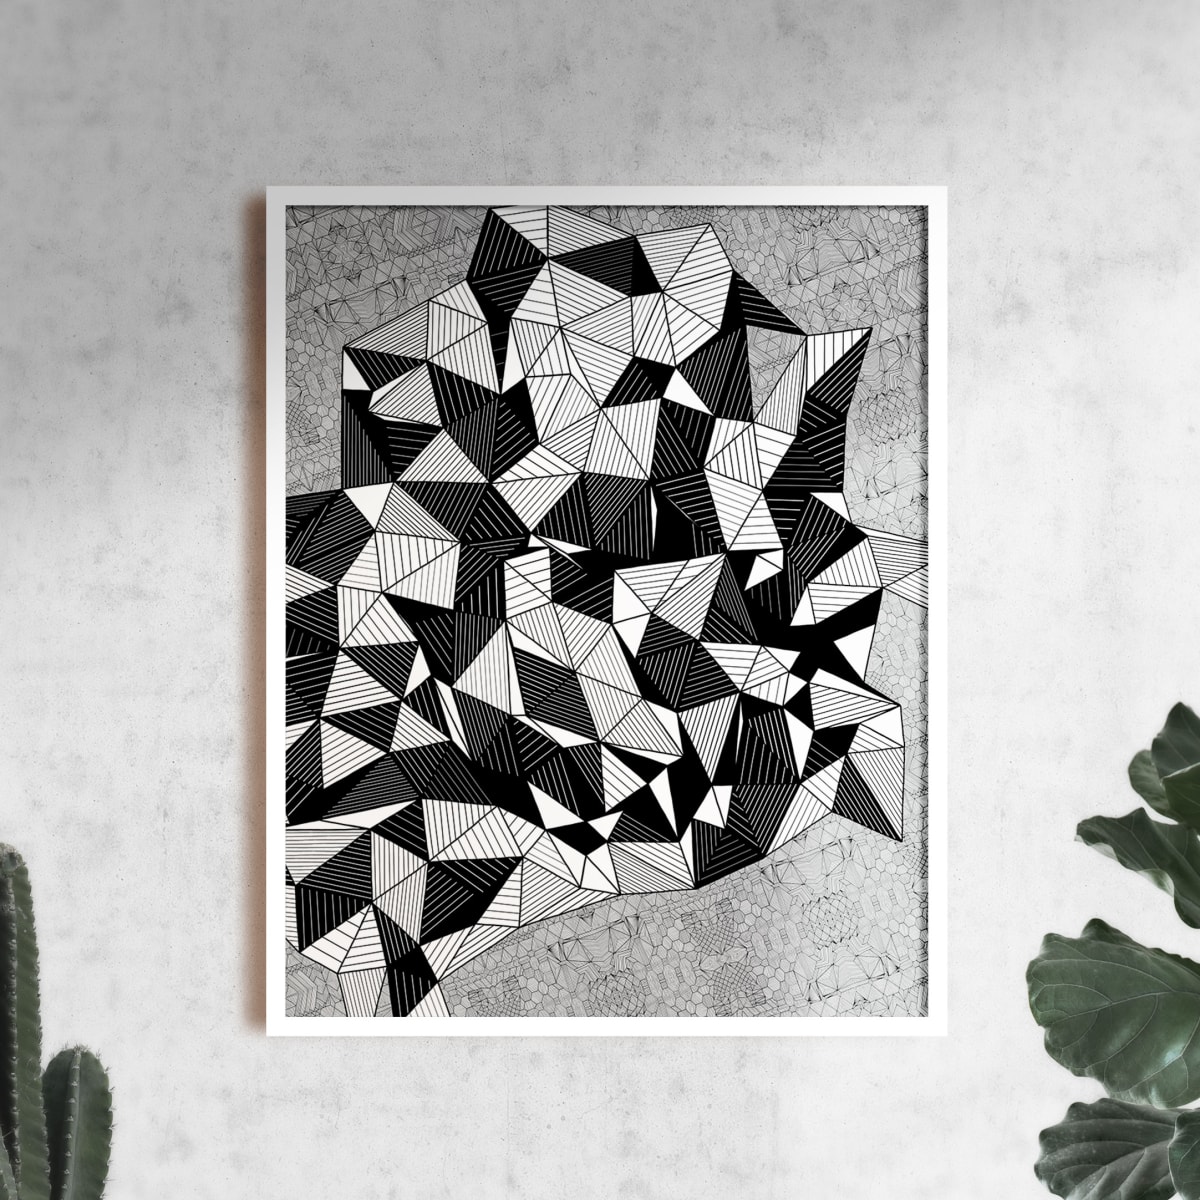 "Conscious Growth 063" Large One-of-a-Kind Print by Debbie Clapper  Image: Conscious Growth Print 063, a black and white one of a kind archival modern art print